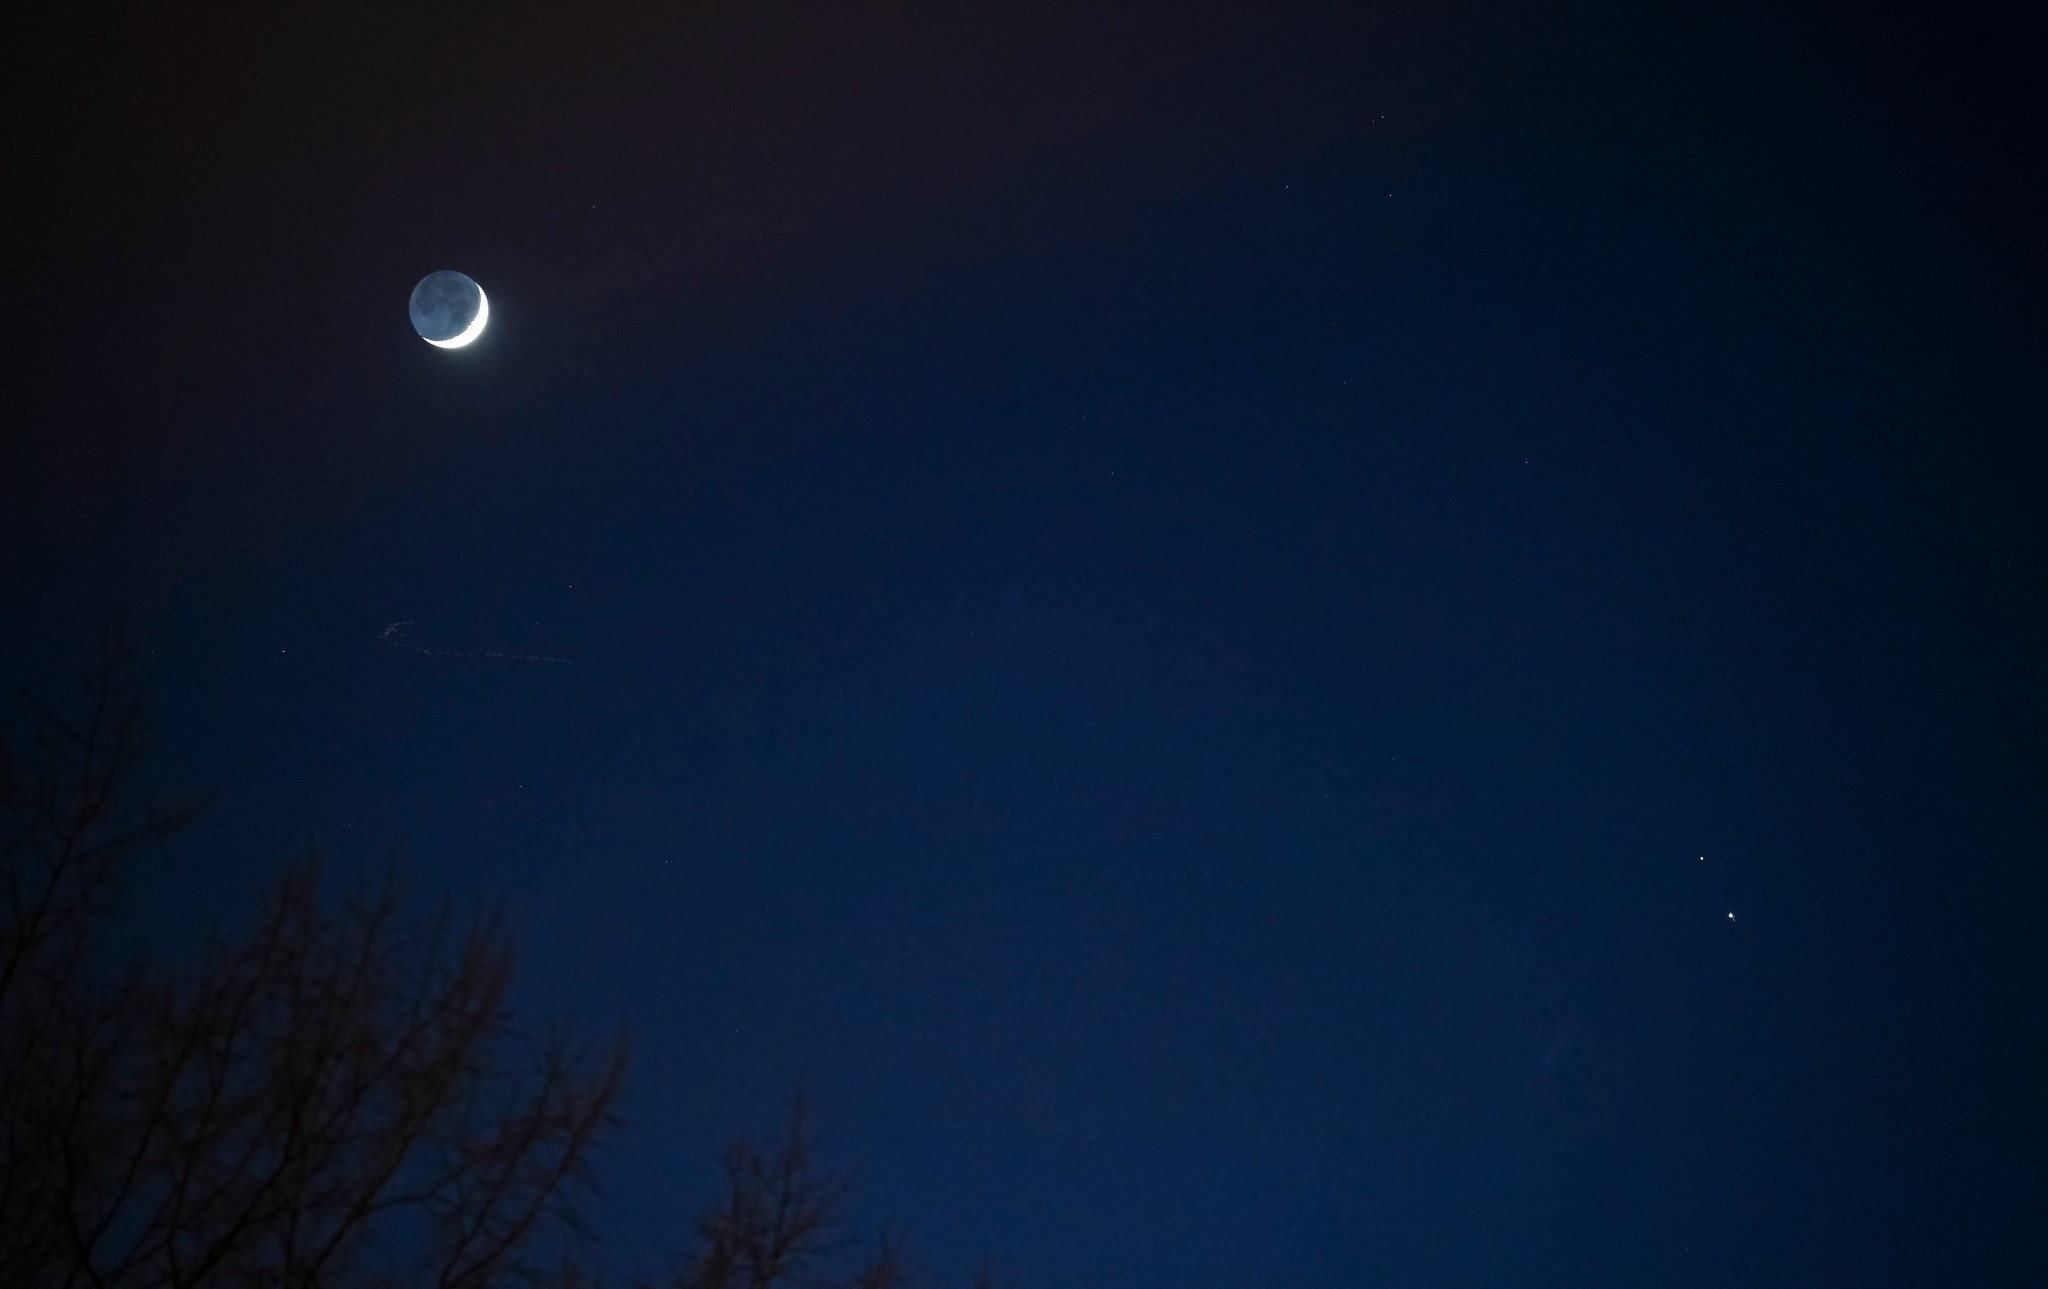 The night sky is deep blue, framed at bottom left by leafless trees branches. At top left, the Moon glows. Saturn and Jupiter are visible at upper right and upper left, respectively.